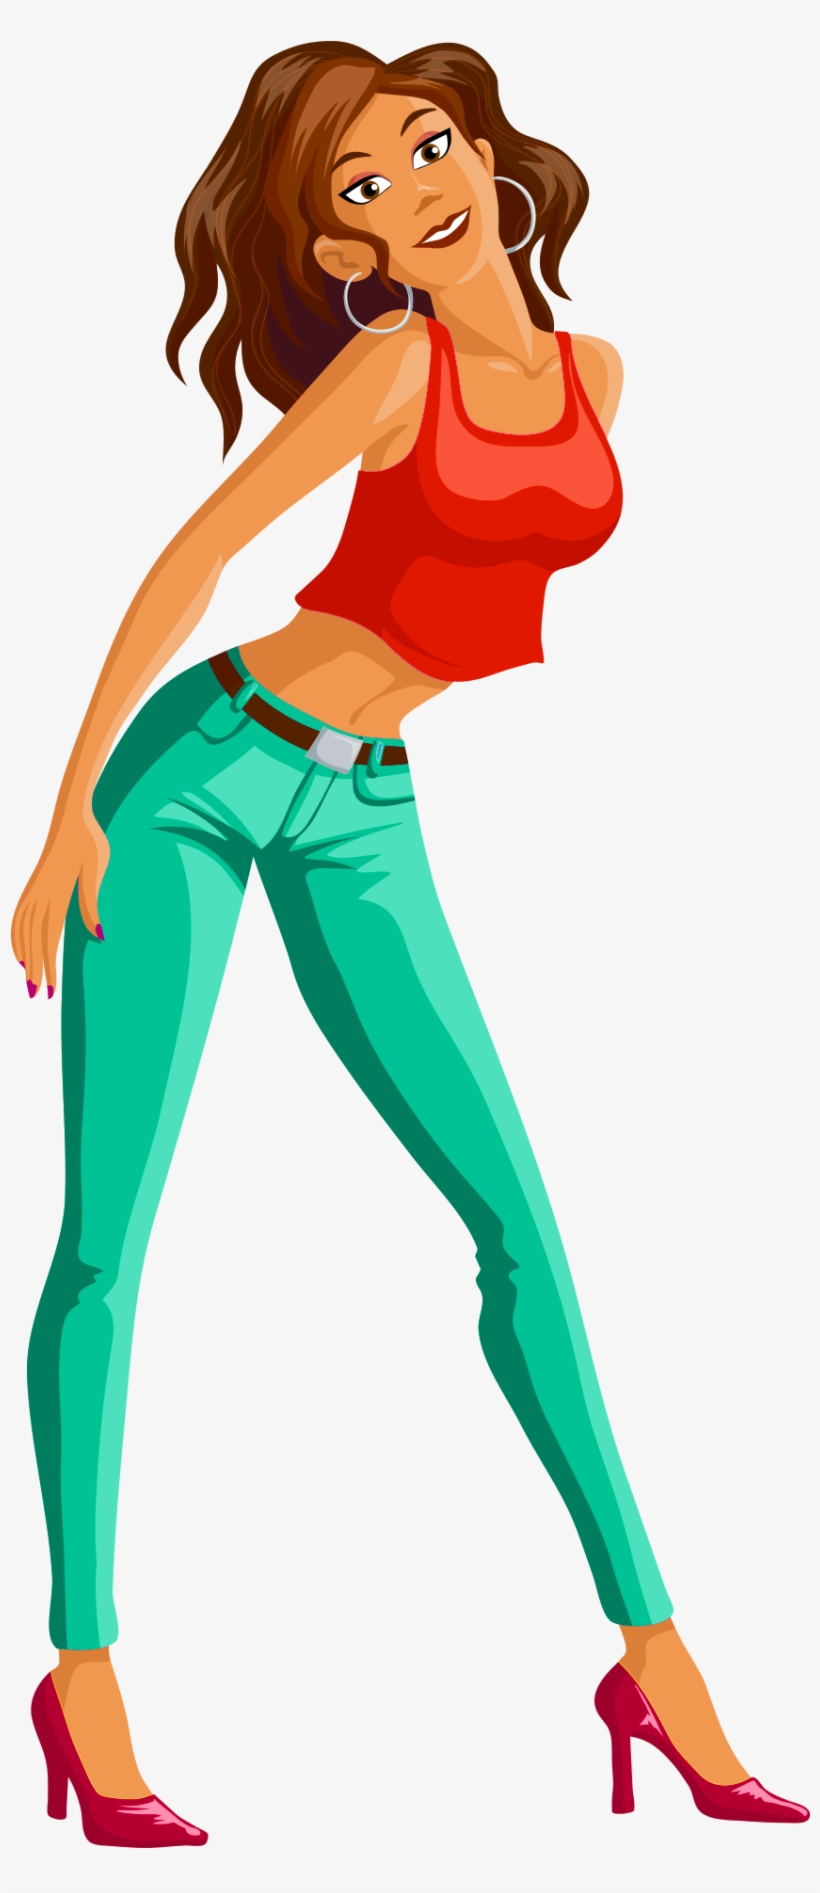 Dance Girl Background Png - Png Dancing Girl, transparent png #524184